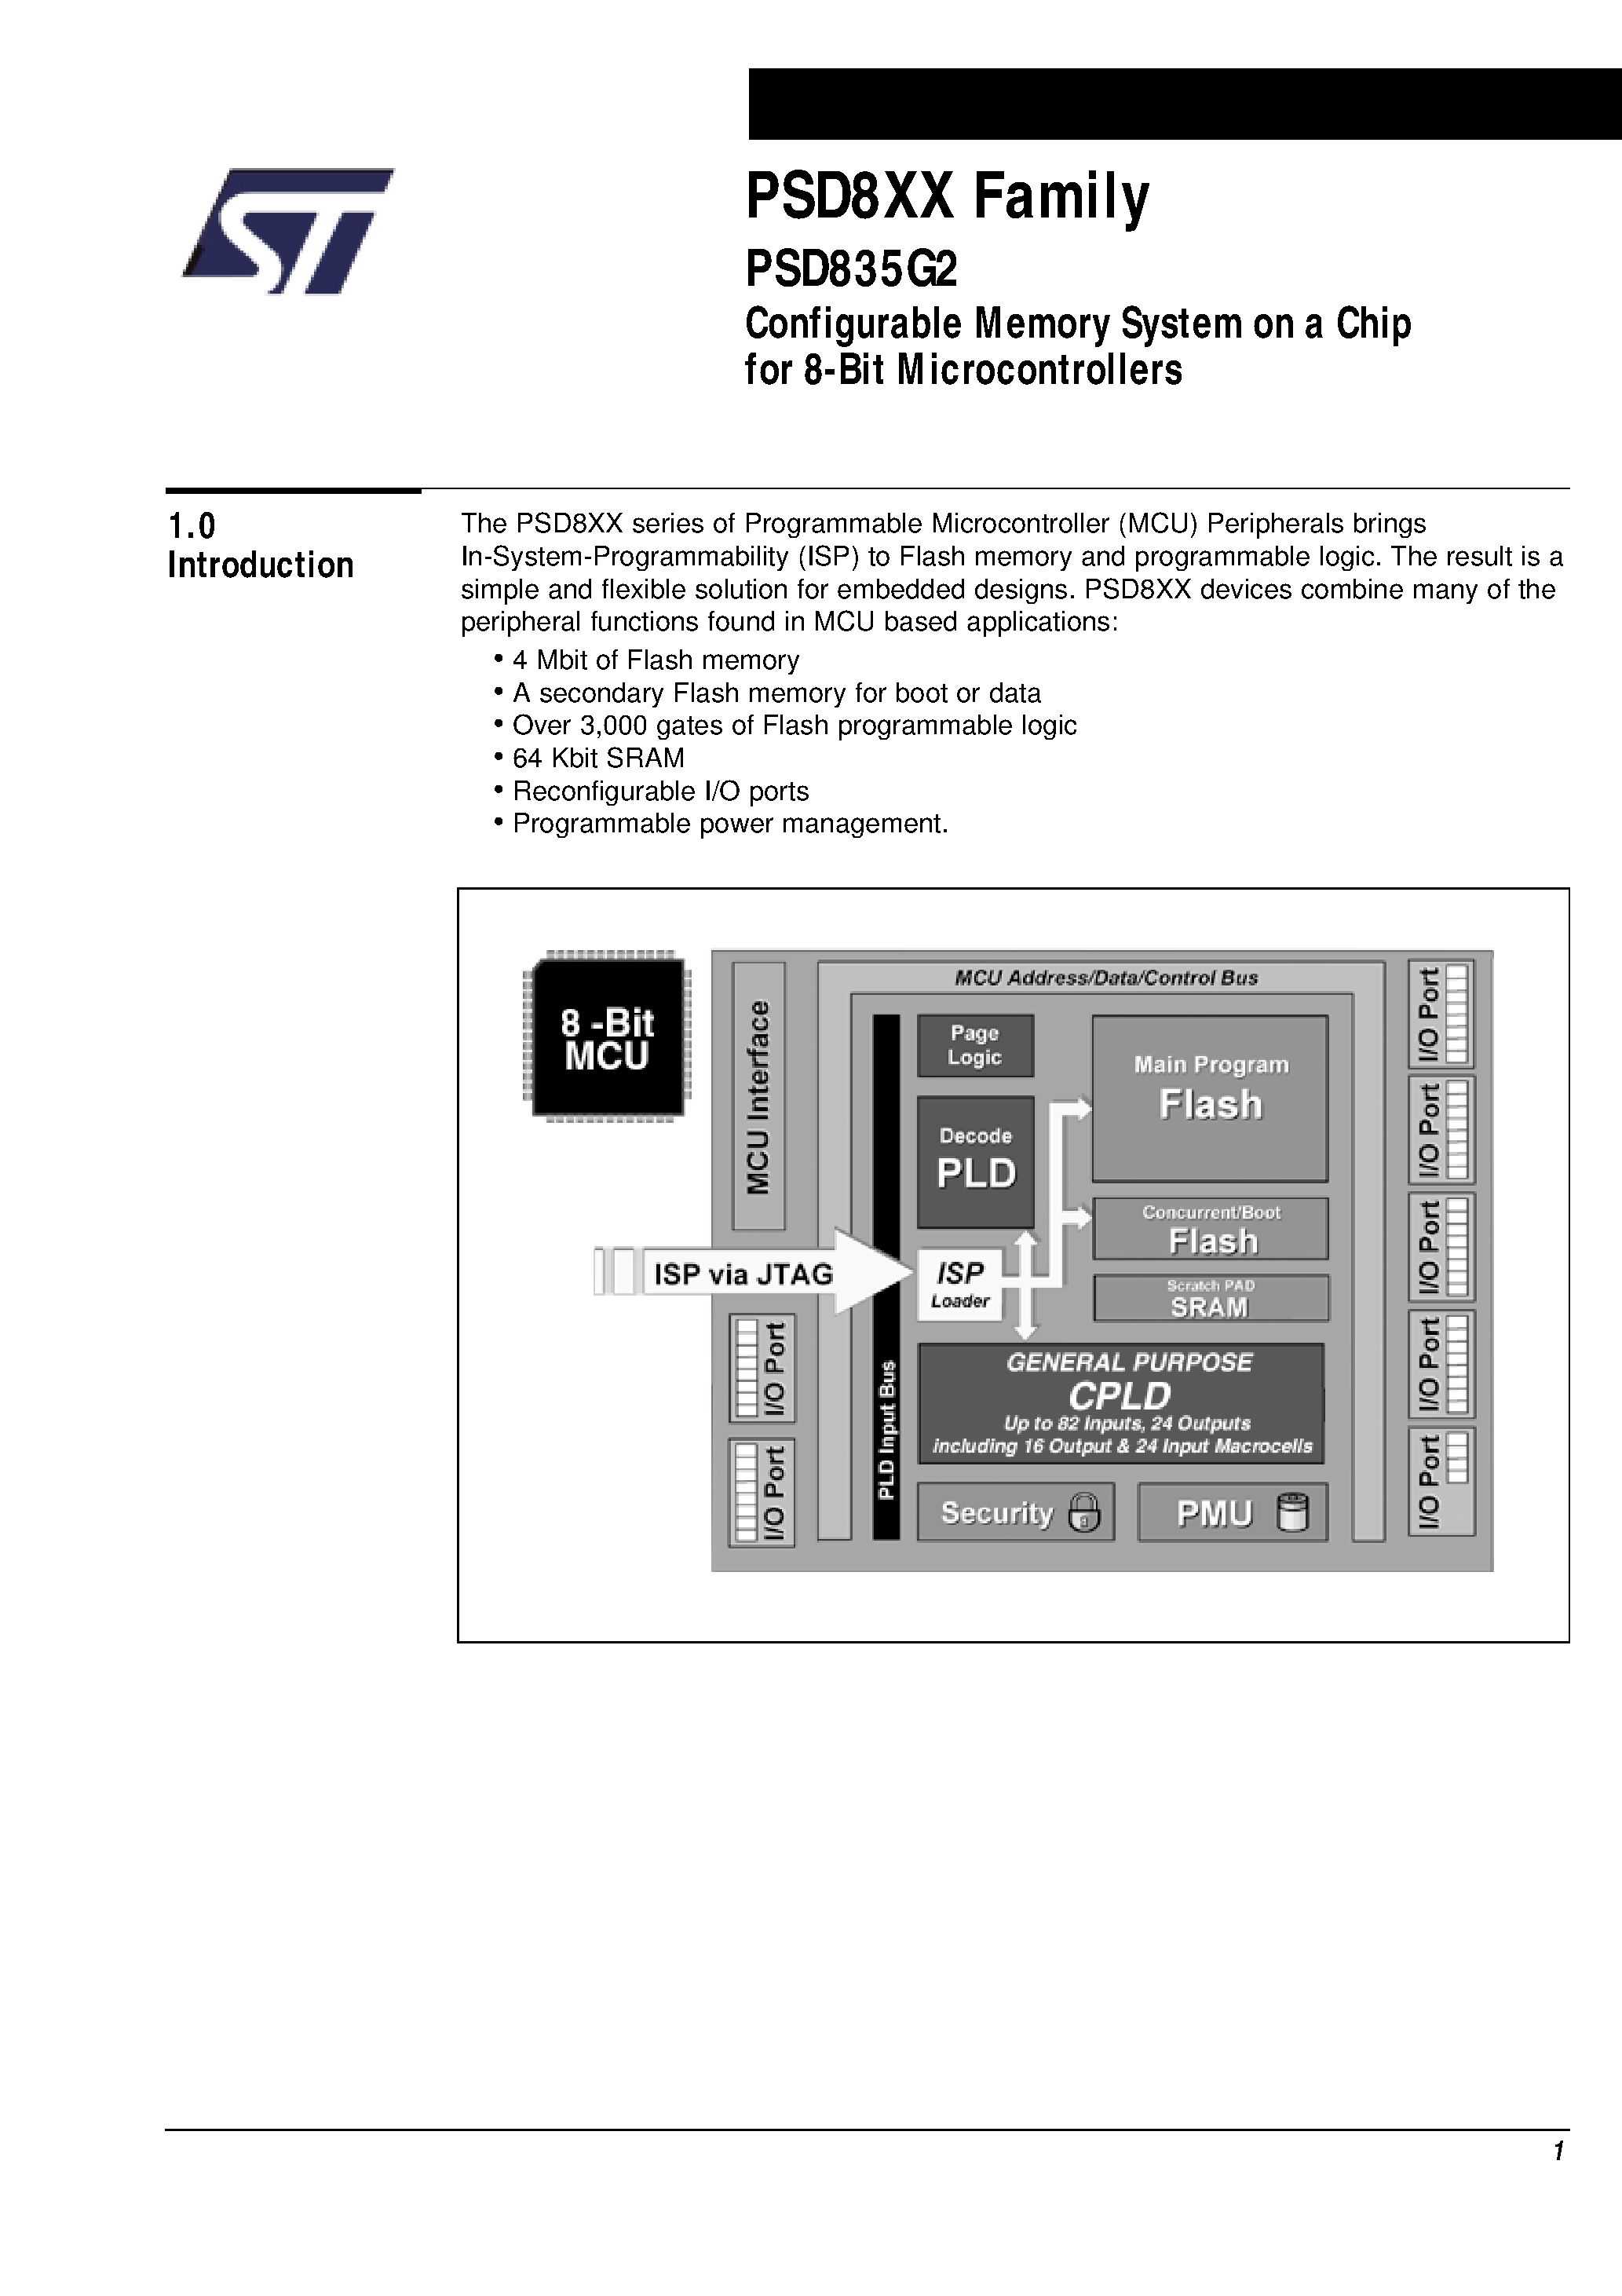 Datasheet PSD835F2V-A-70MI - Configurable Memory System on a Chip for 8-Bit Microcontrollers page 2